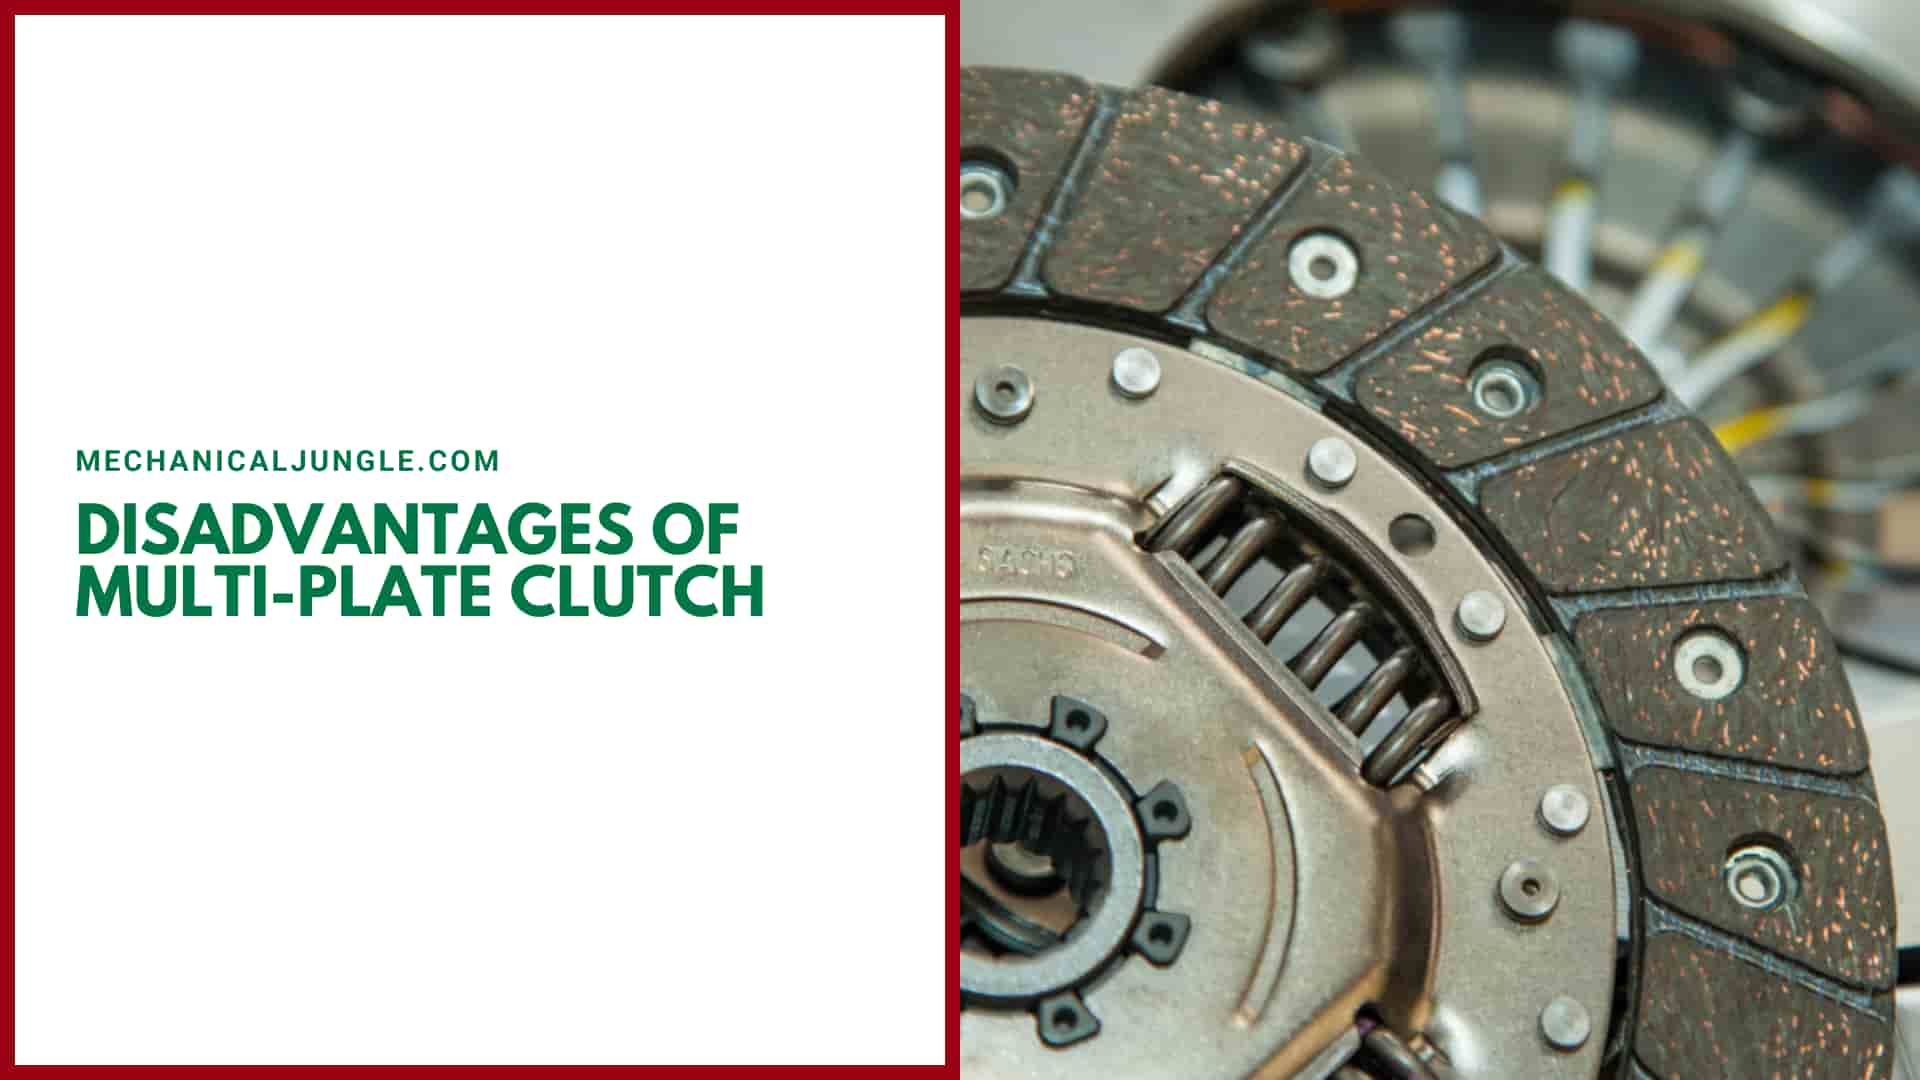 Disadvantages of Multi-Plate Clutch